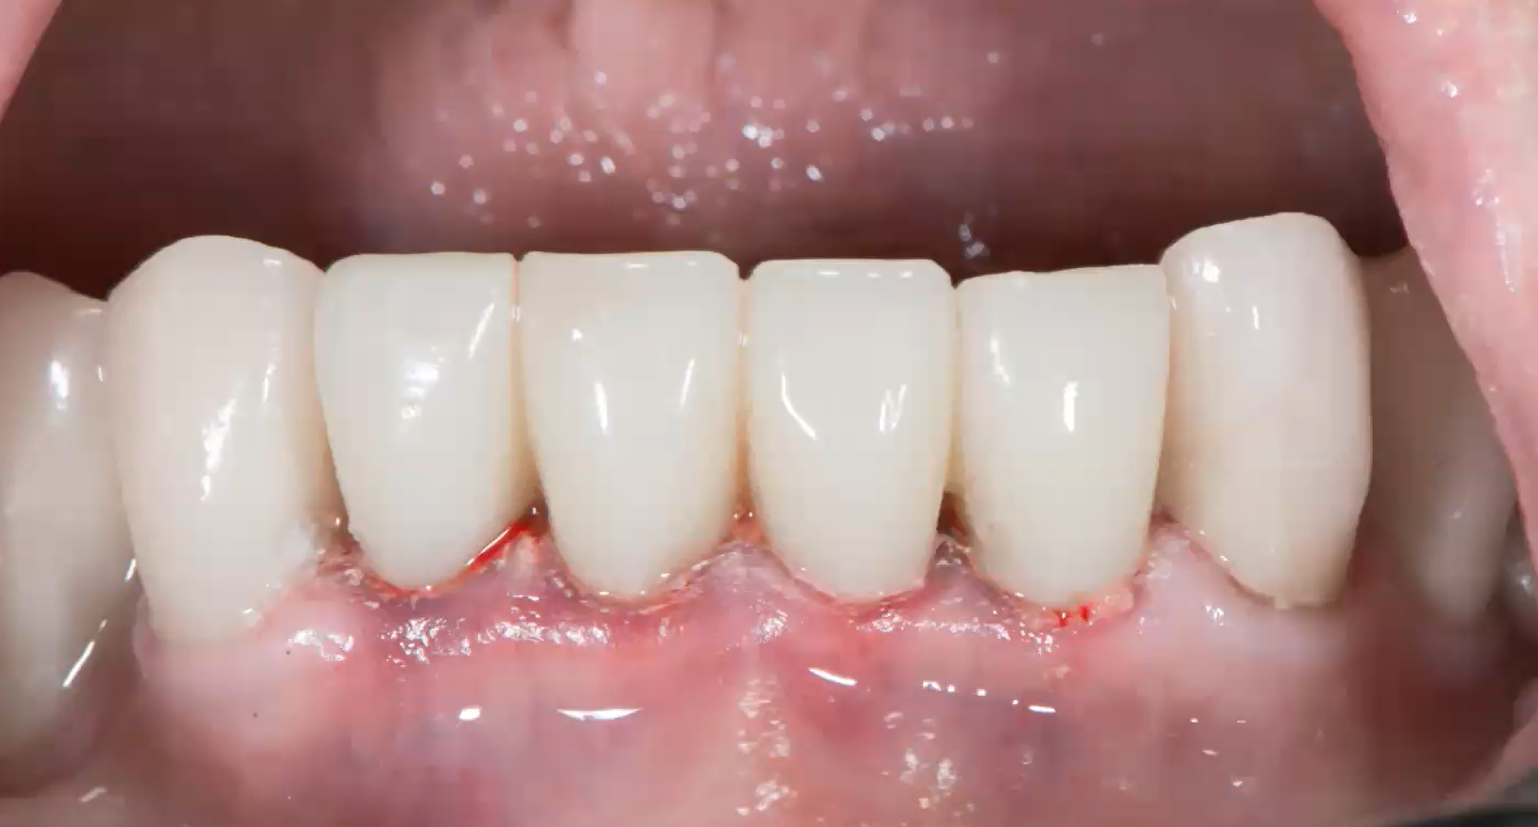 Supporting image for the Elevating Bone Regeneration: EthOss Insights and Innovations webinar. Image shows a row of bottom teeth, slightly bloody, with pale pink gums